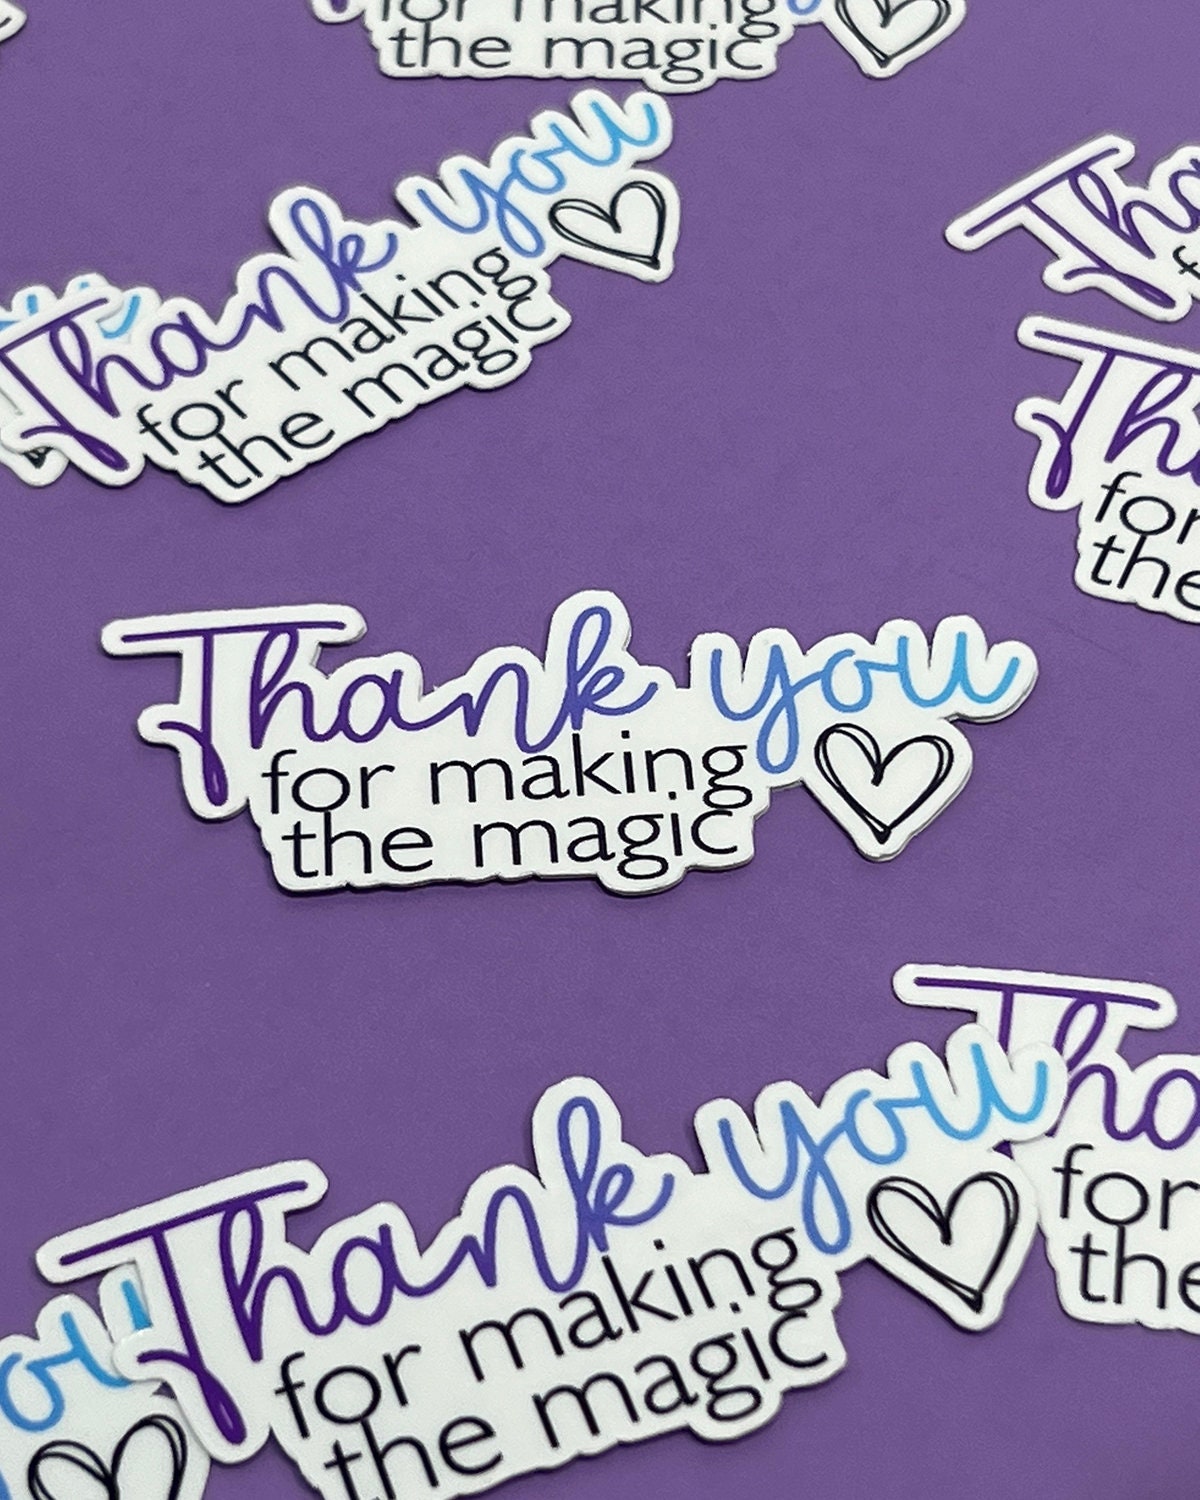 Thank You for making the Magic - Waterproof Sticker | Cast Member Appreciation | 100th Anniversary Inspired